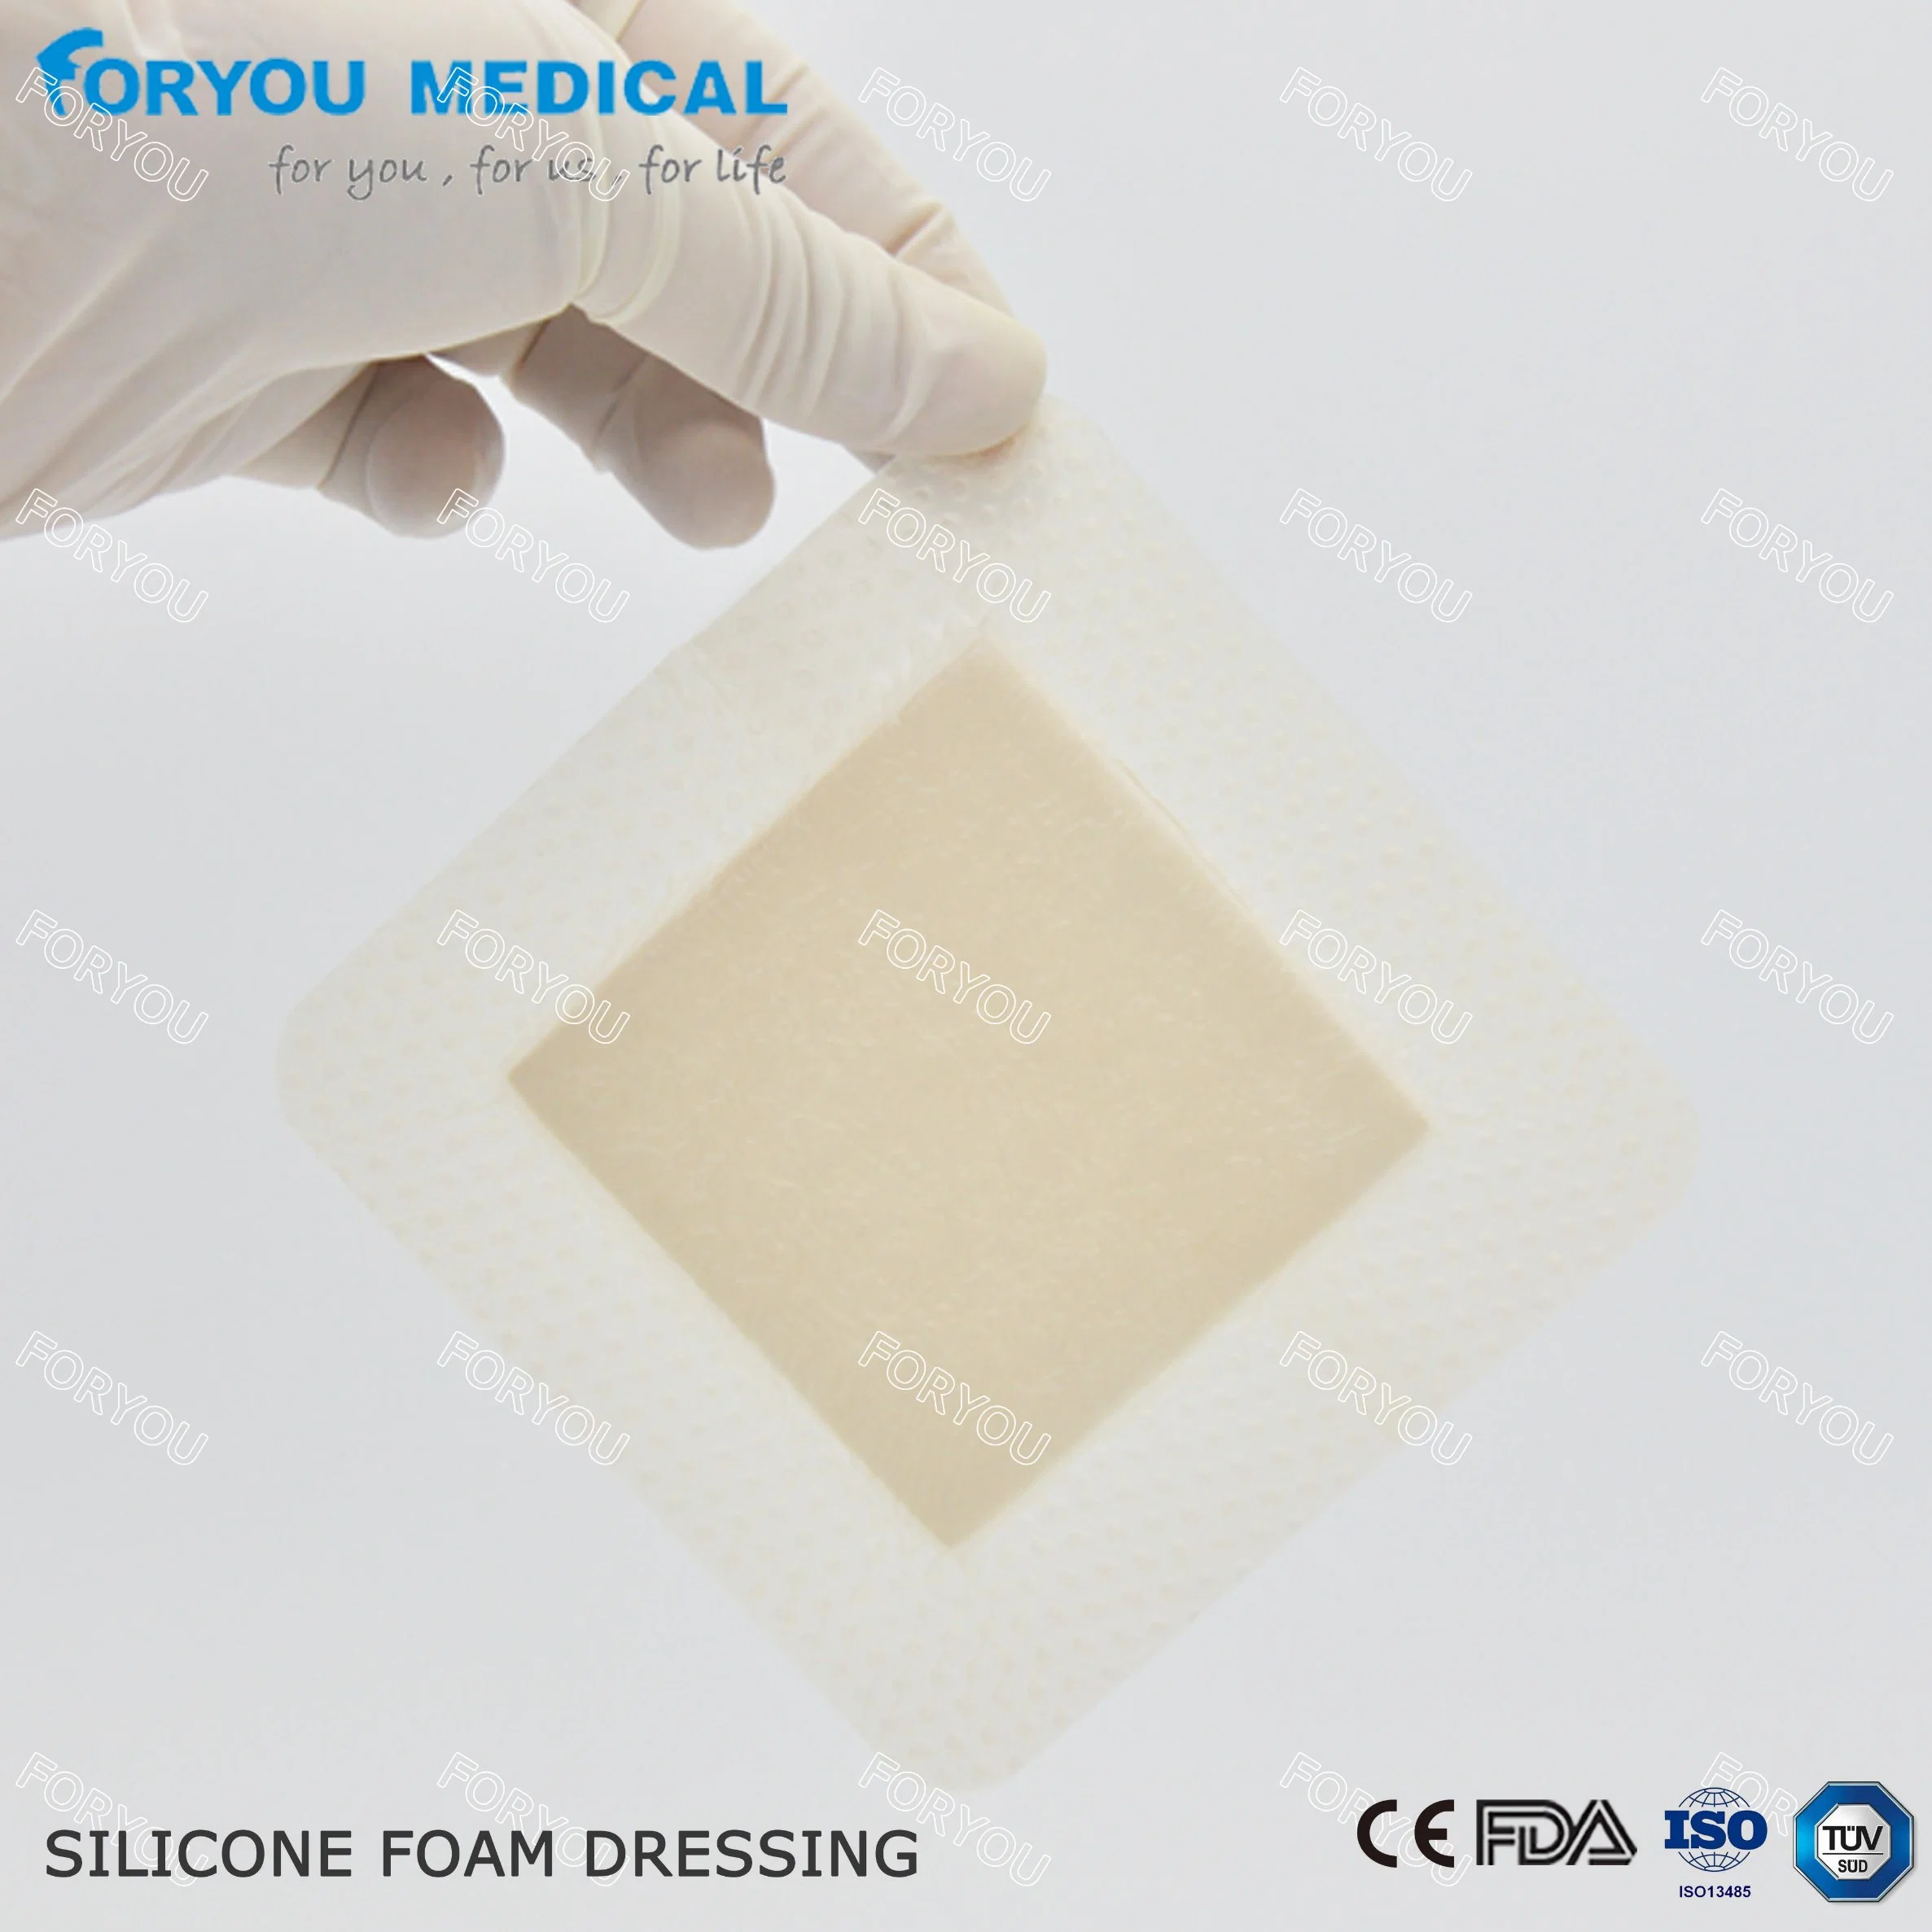 Advanced Woud Care Dressing Silicone Bordered Foam in Sacral for Wound Healing